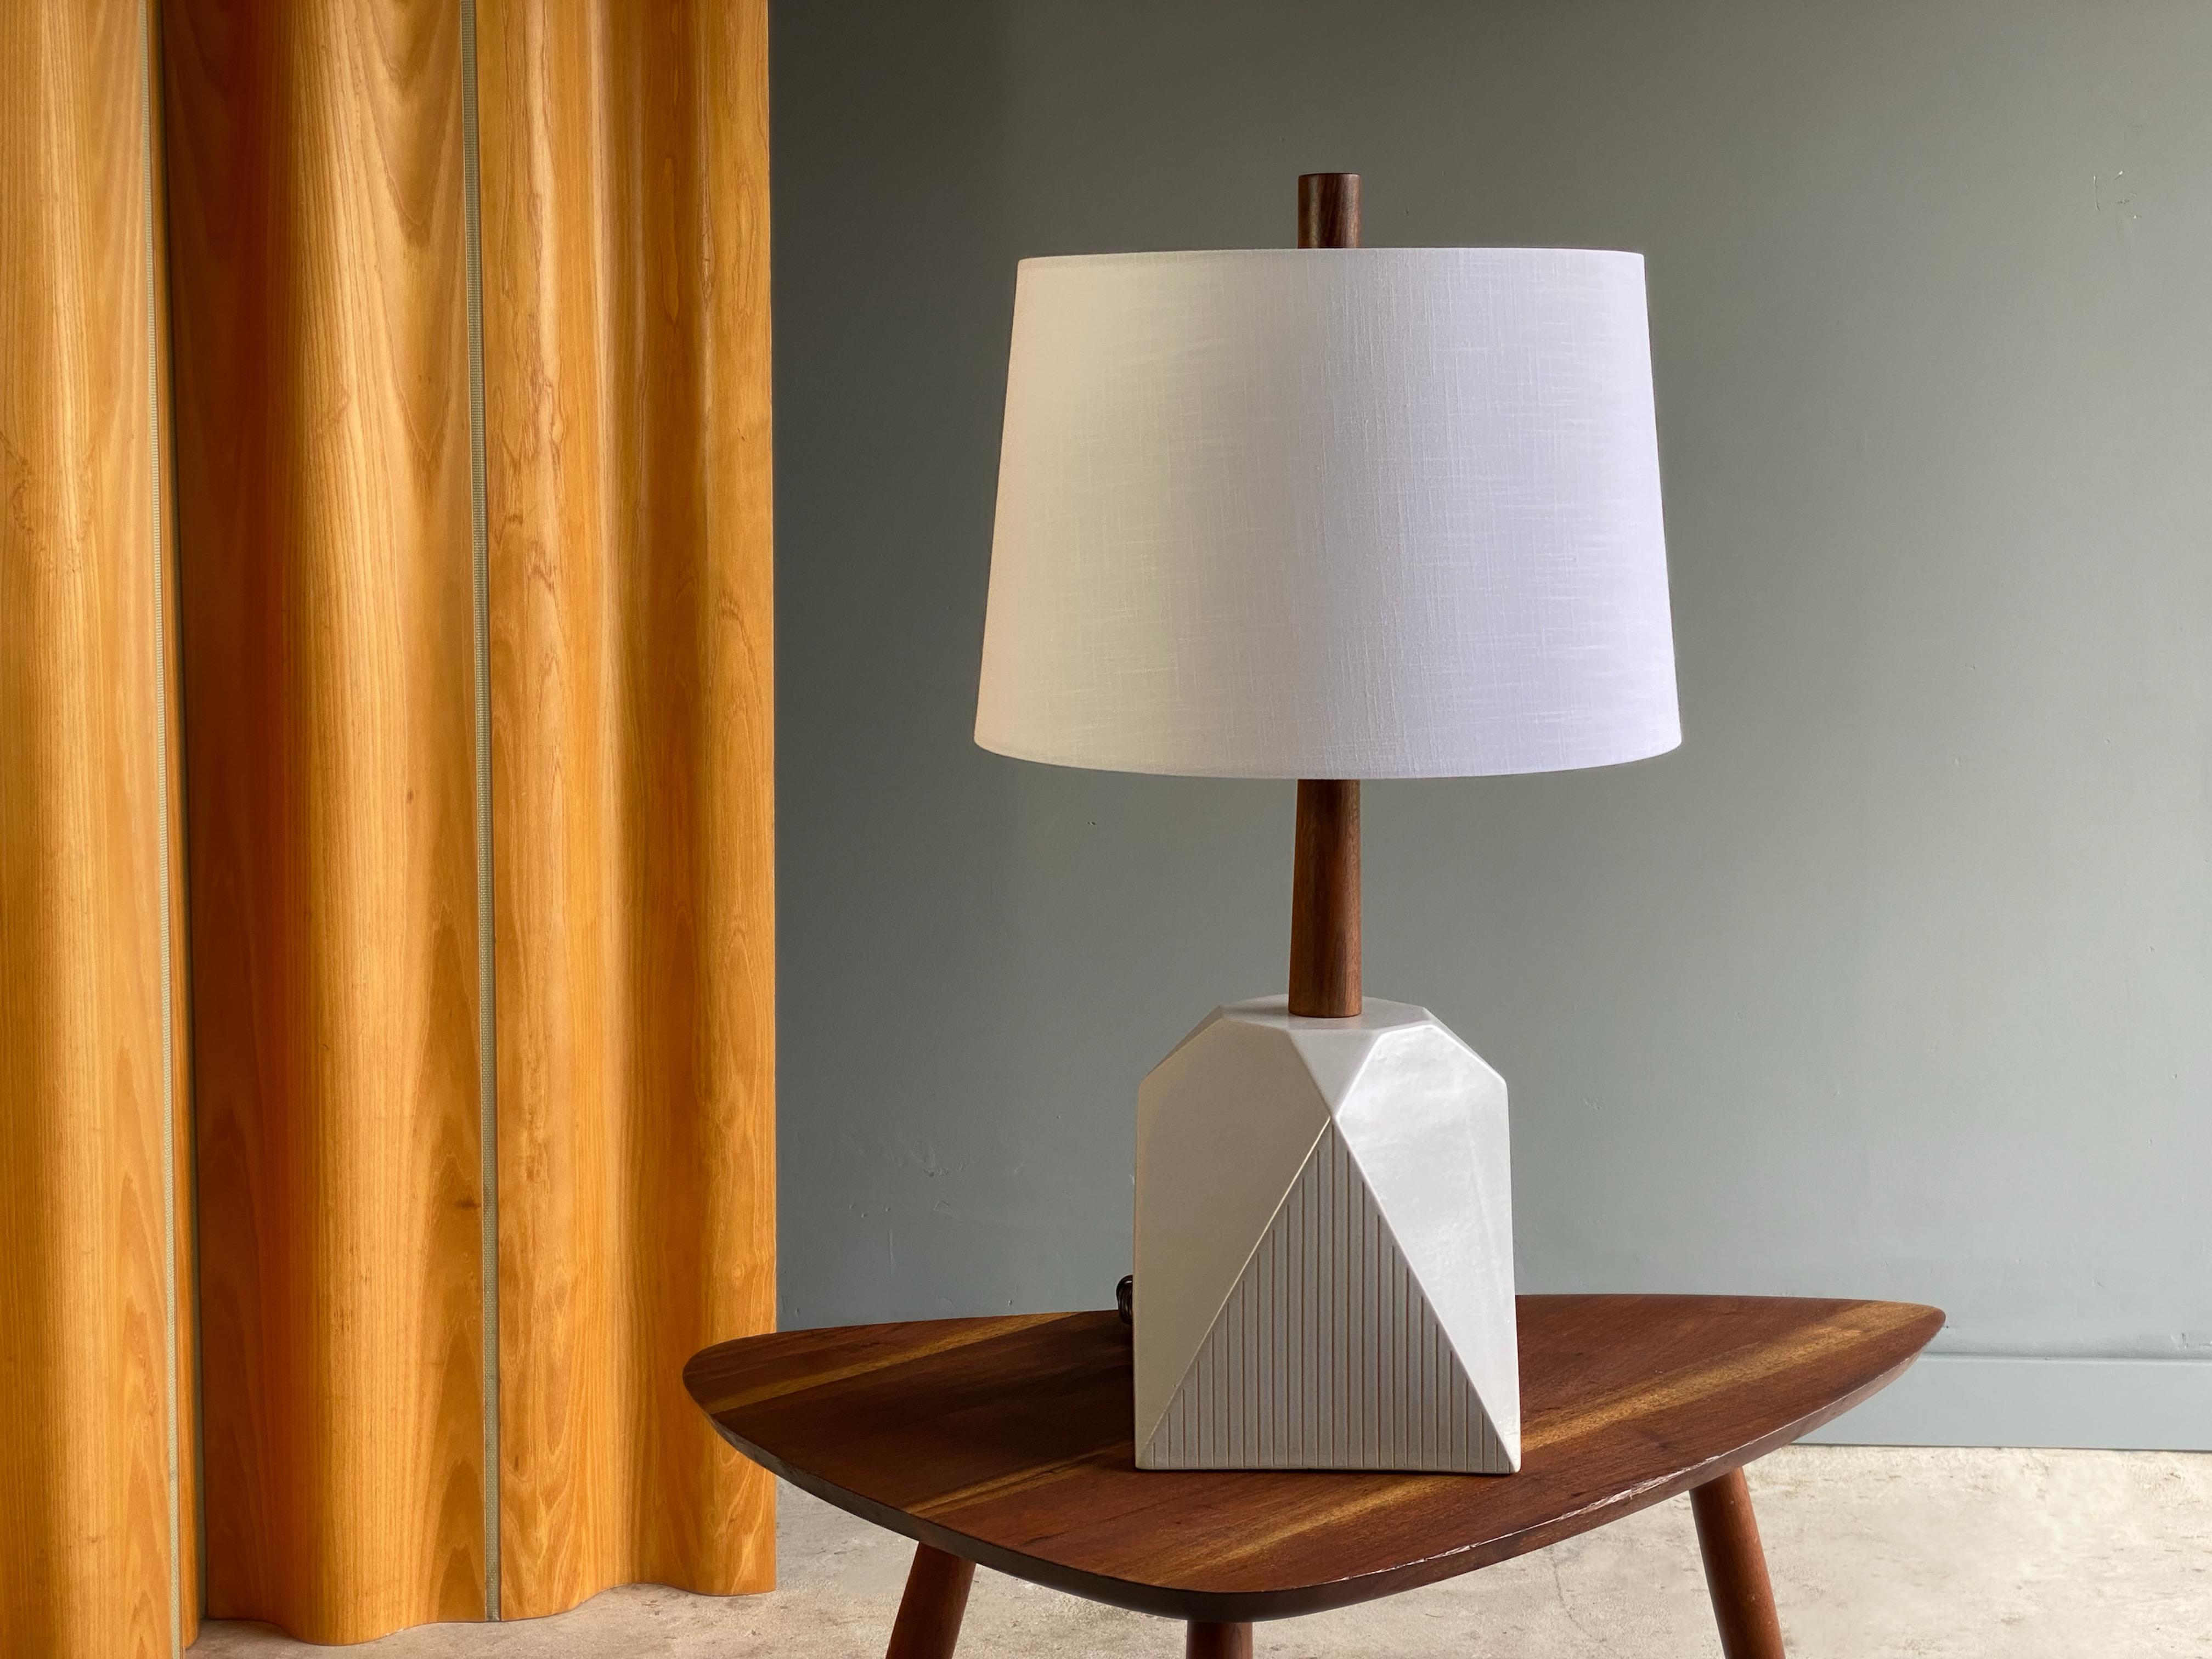 Uncommon geometric ceramic table lamp by talented Gordon and Jane Martz for Marshall studios. This example features incised vertical detailing on a lovely white glaze body with walnut neck and finial. Unique form that changes its appearance when